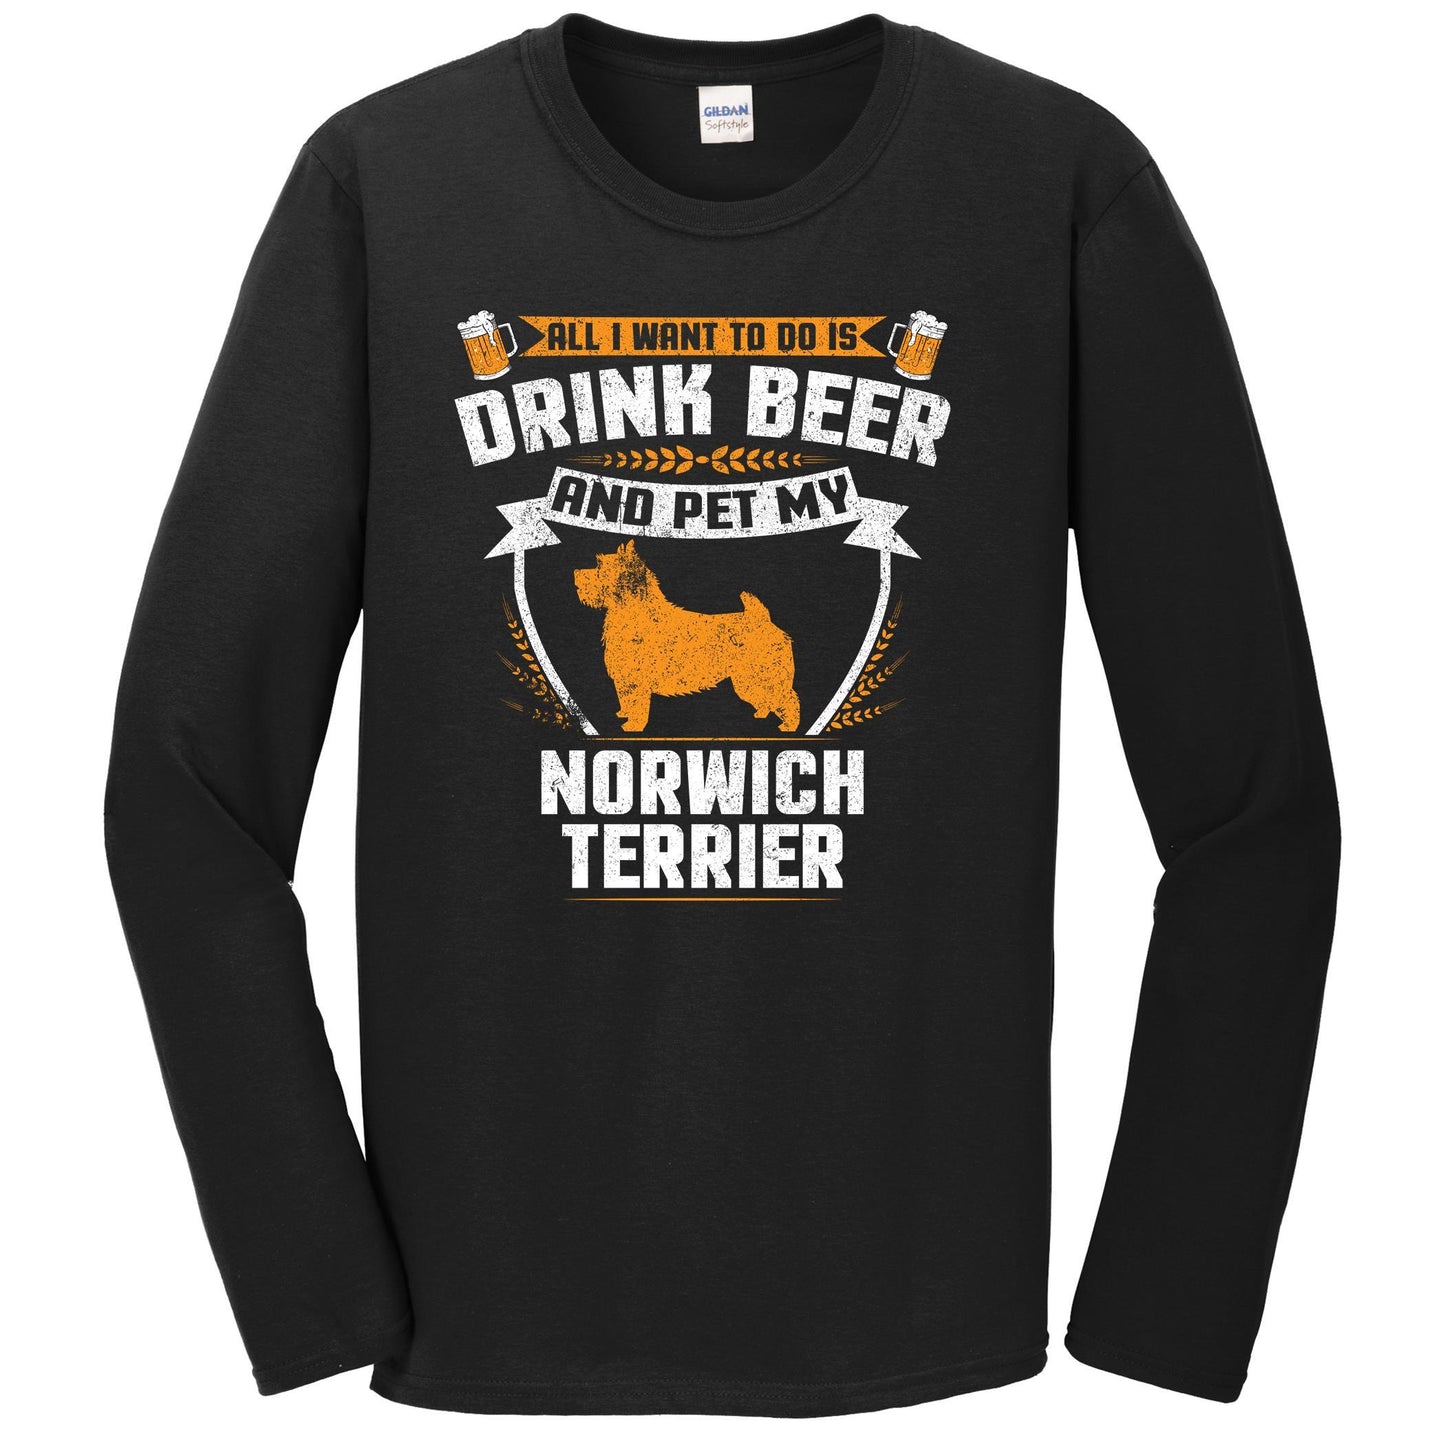 All I Want To Do Is Drink Beer And Pet My Norwich Terrier Funny Dog Owner Long Sleeve Shirt